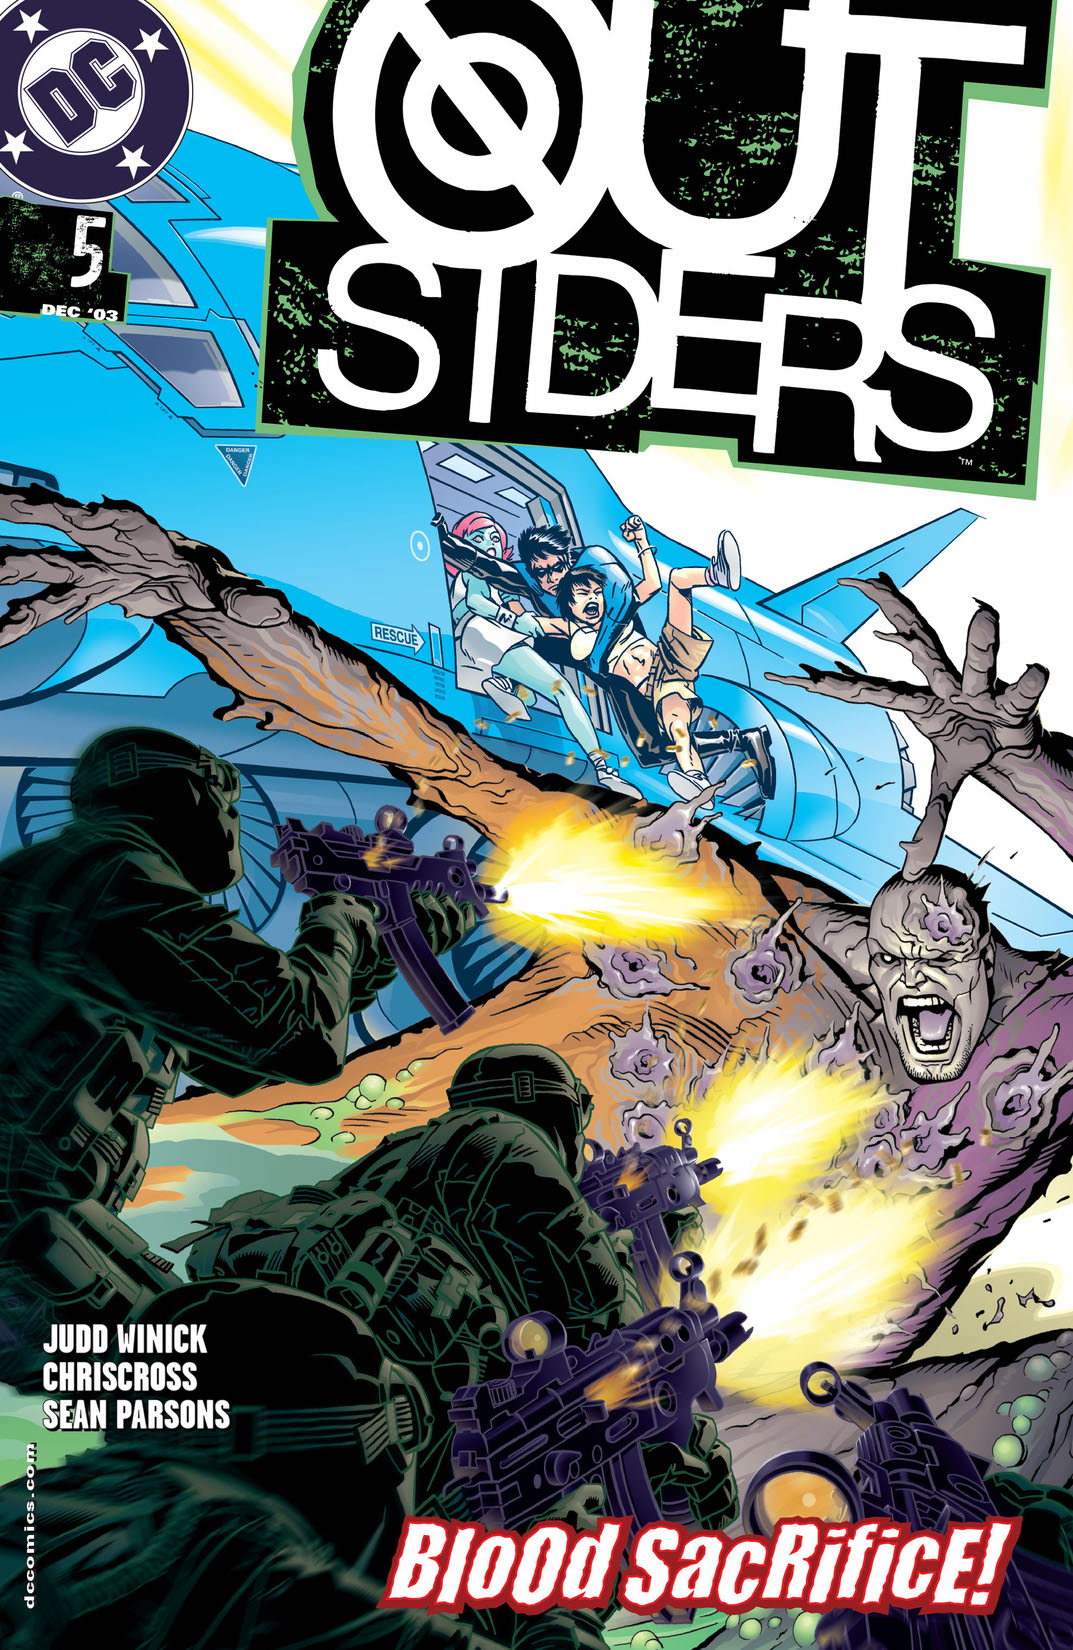 Outsiders (2003-) #5 preview images